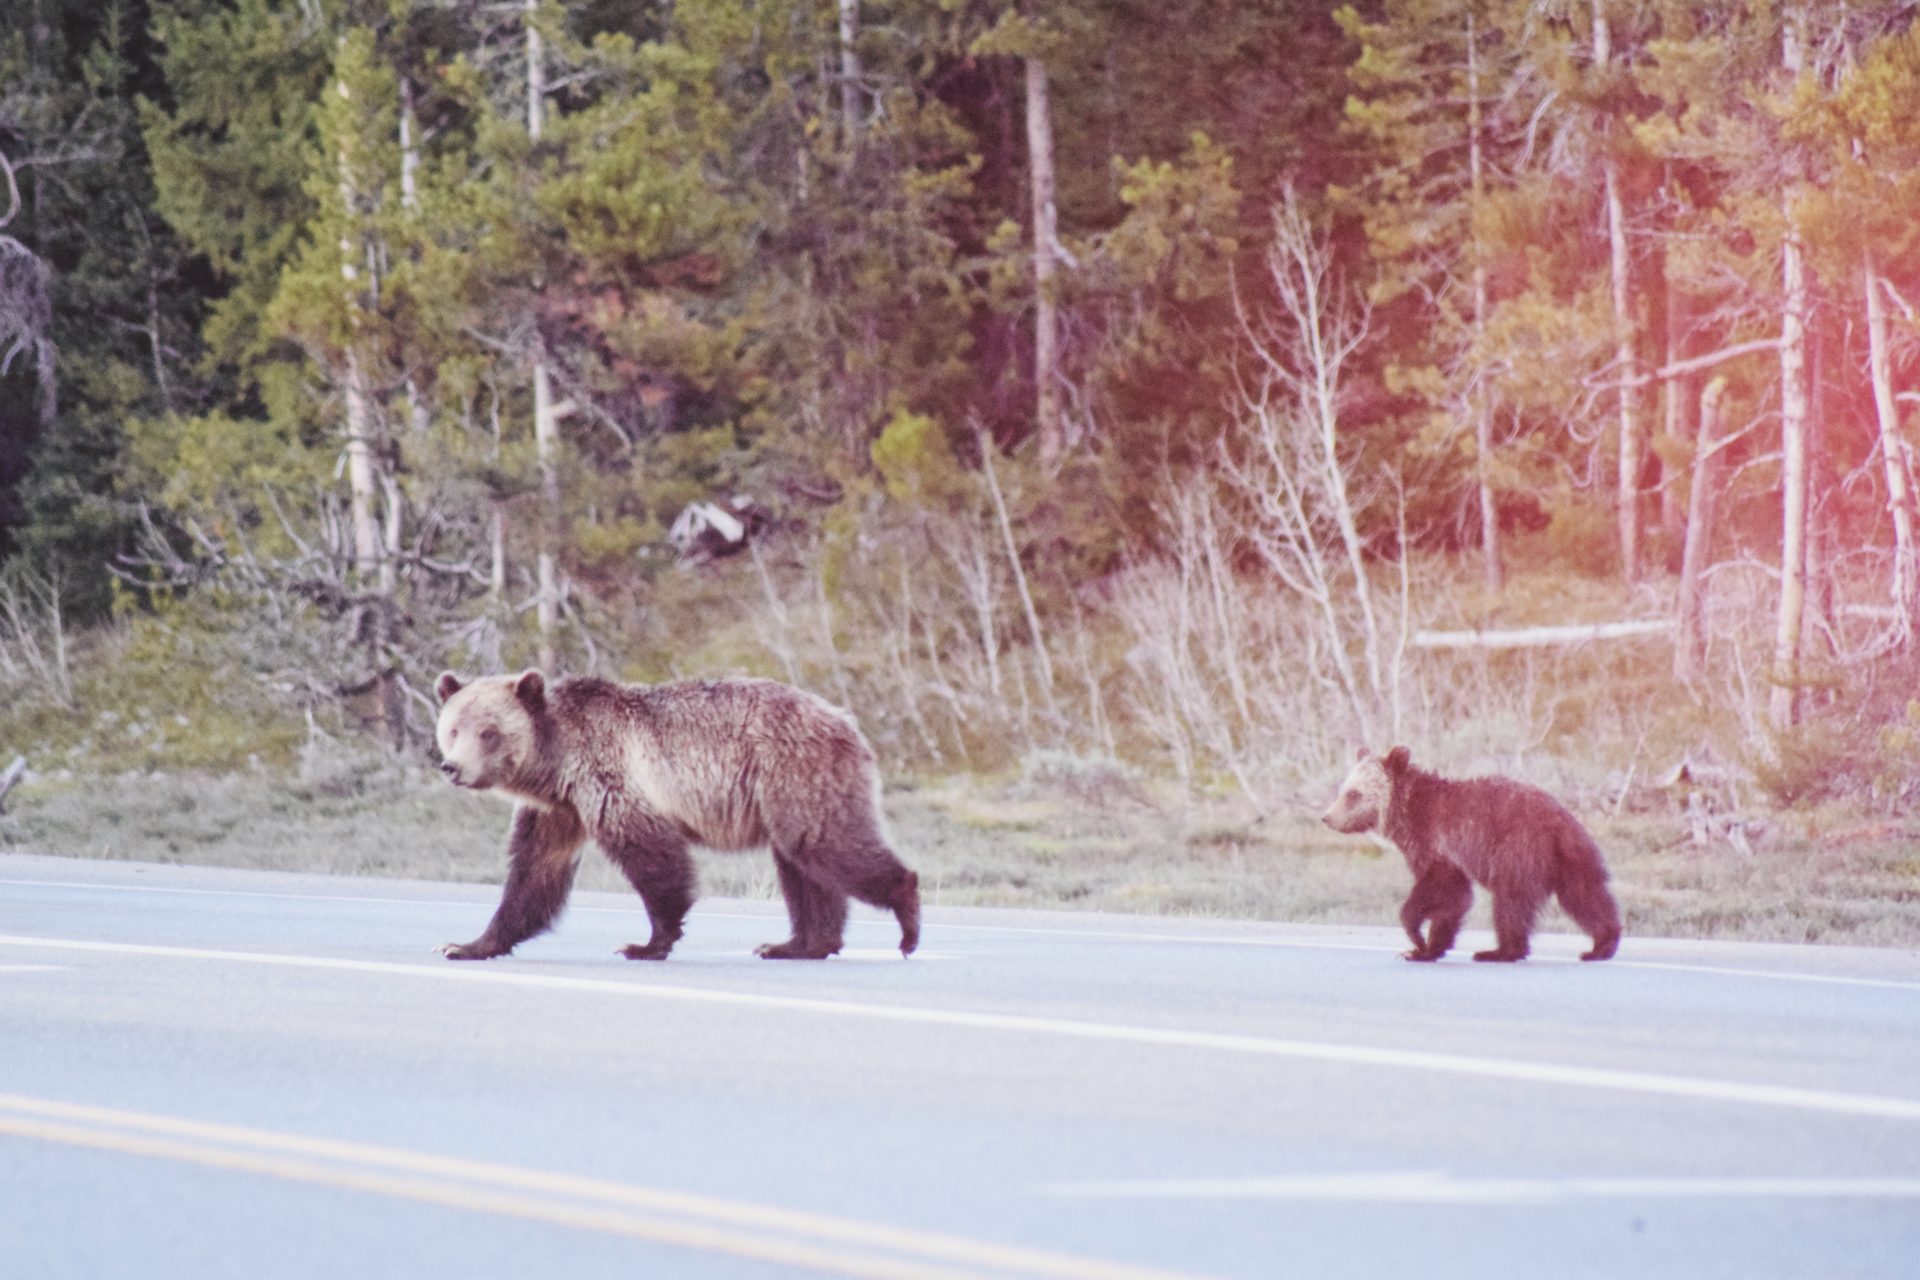 A mama bear and her cub crossing a highway in the forest